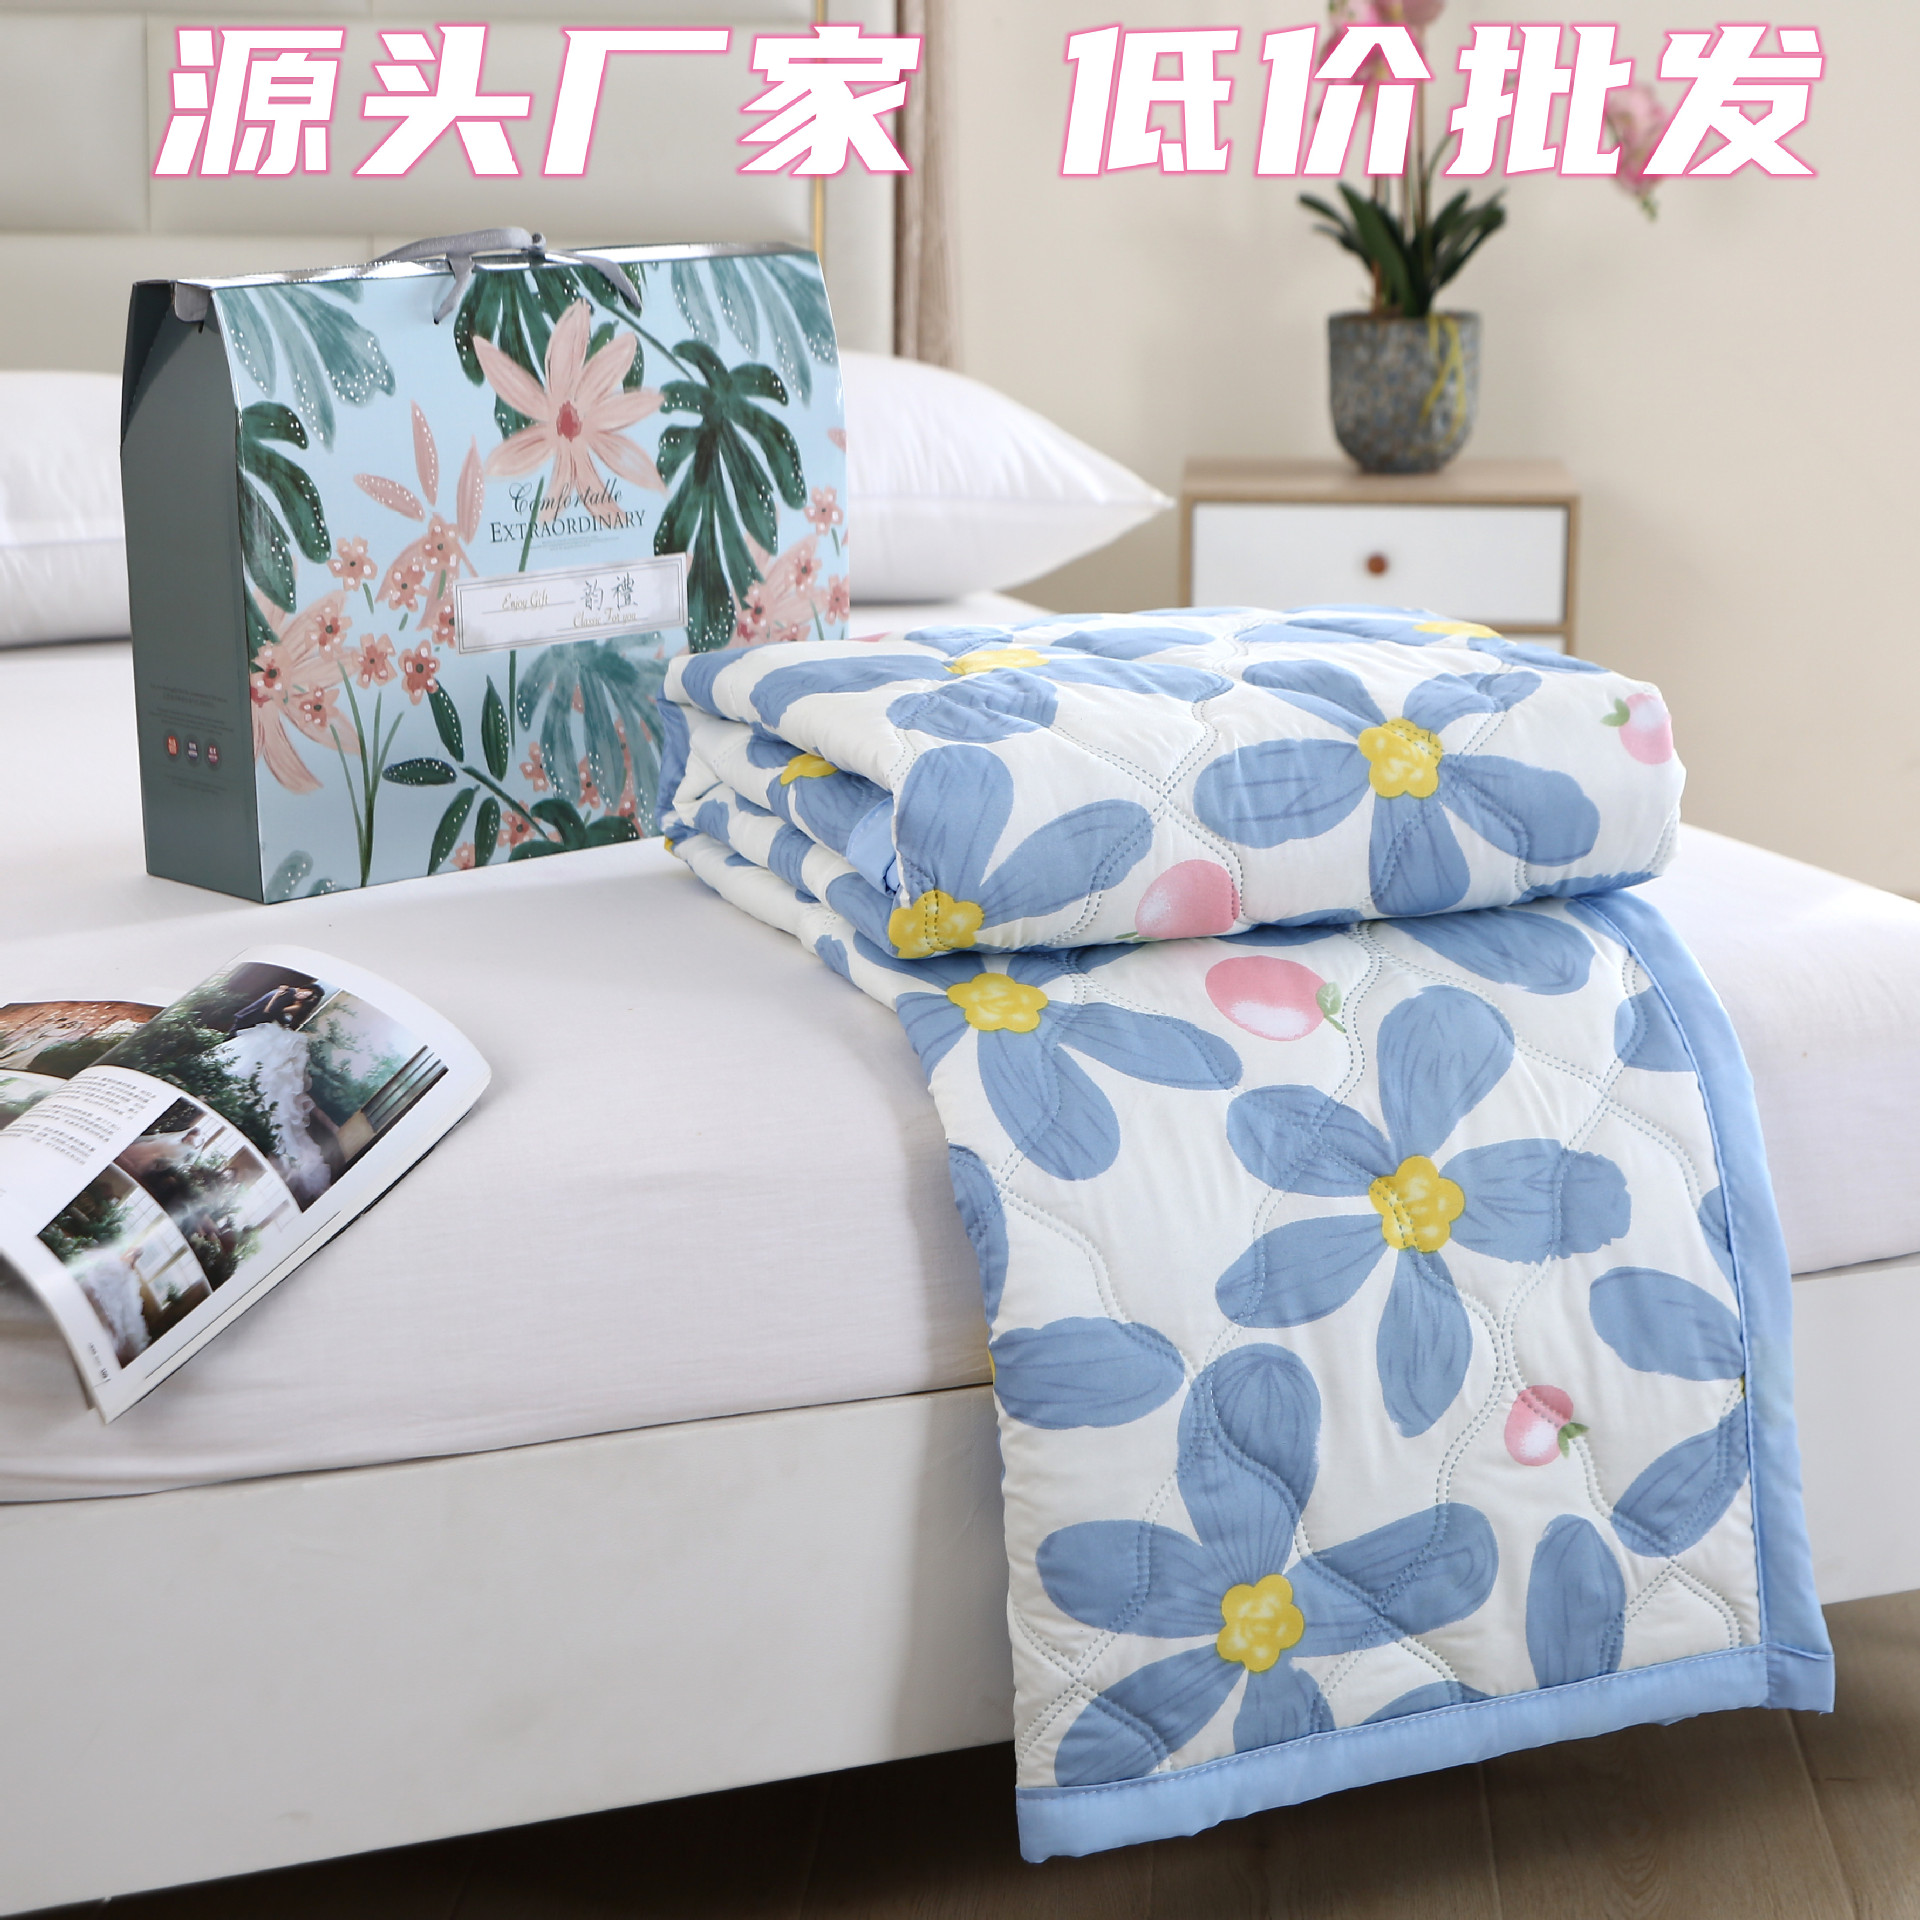 Summer Quilt Airable Cover Washed Cotton Summer Quilt Company Will Sell Store Celebration Gifts Summer Quilt Thin Duvet Duvet Insert Factory Wholesale